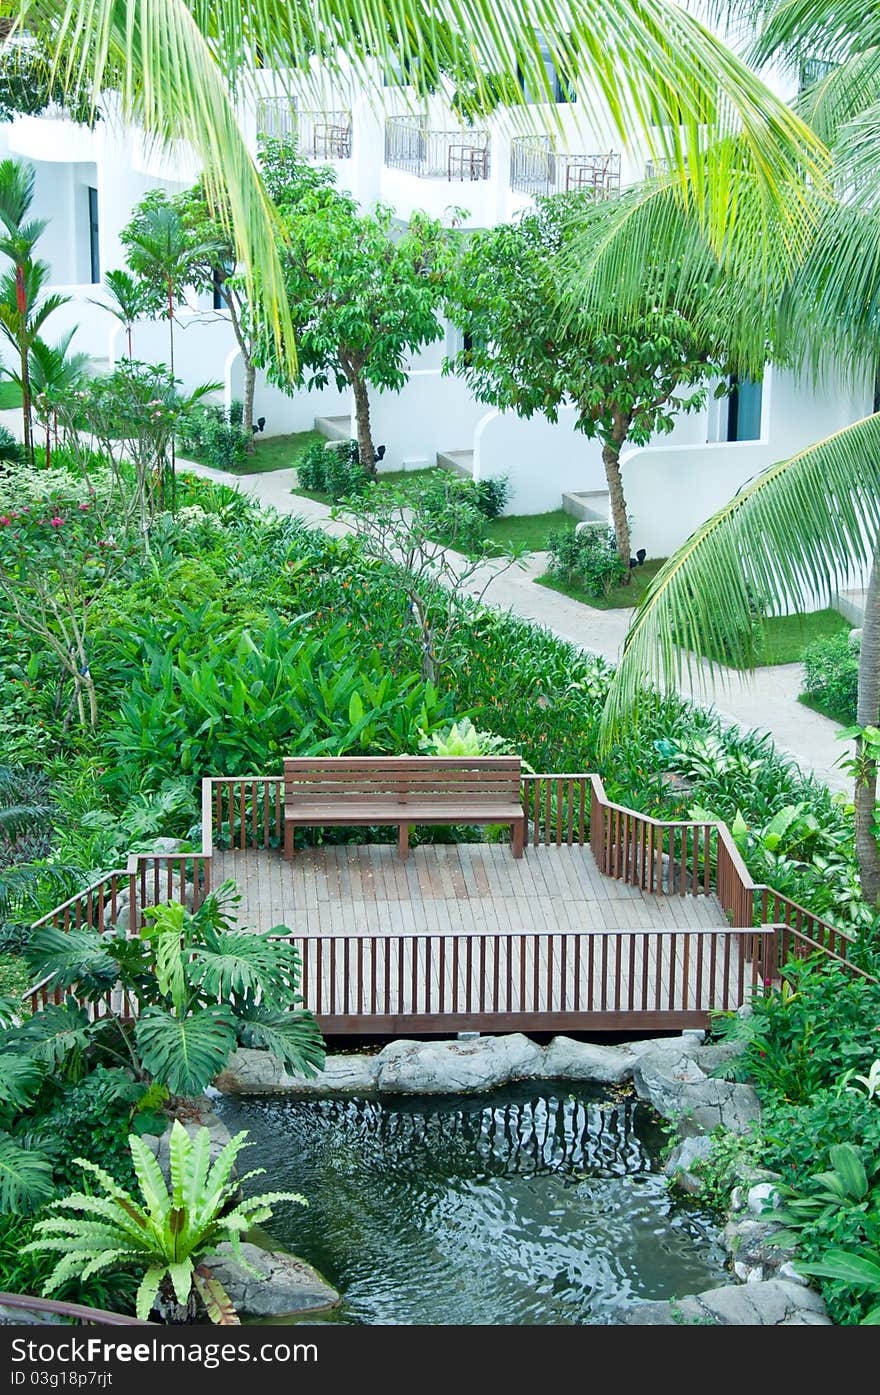 A tropical resort with wooden chair and pond surrounded by greenery